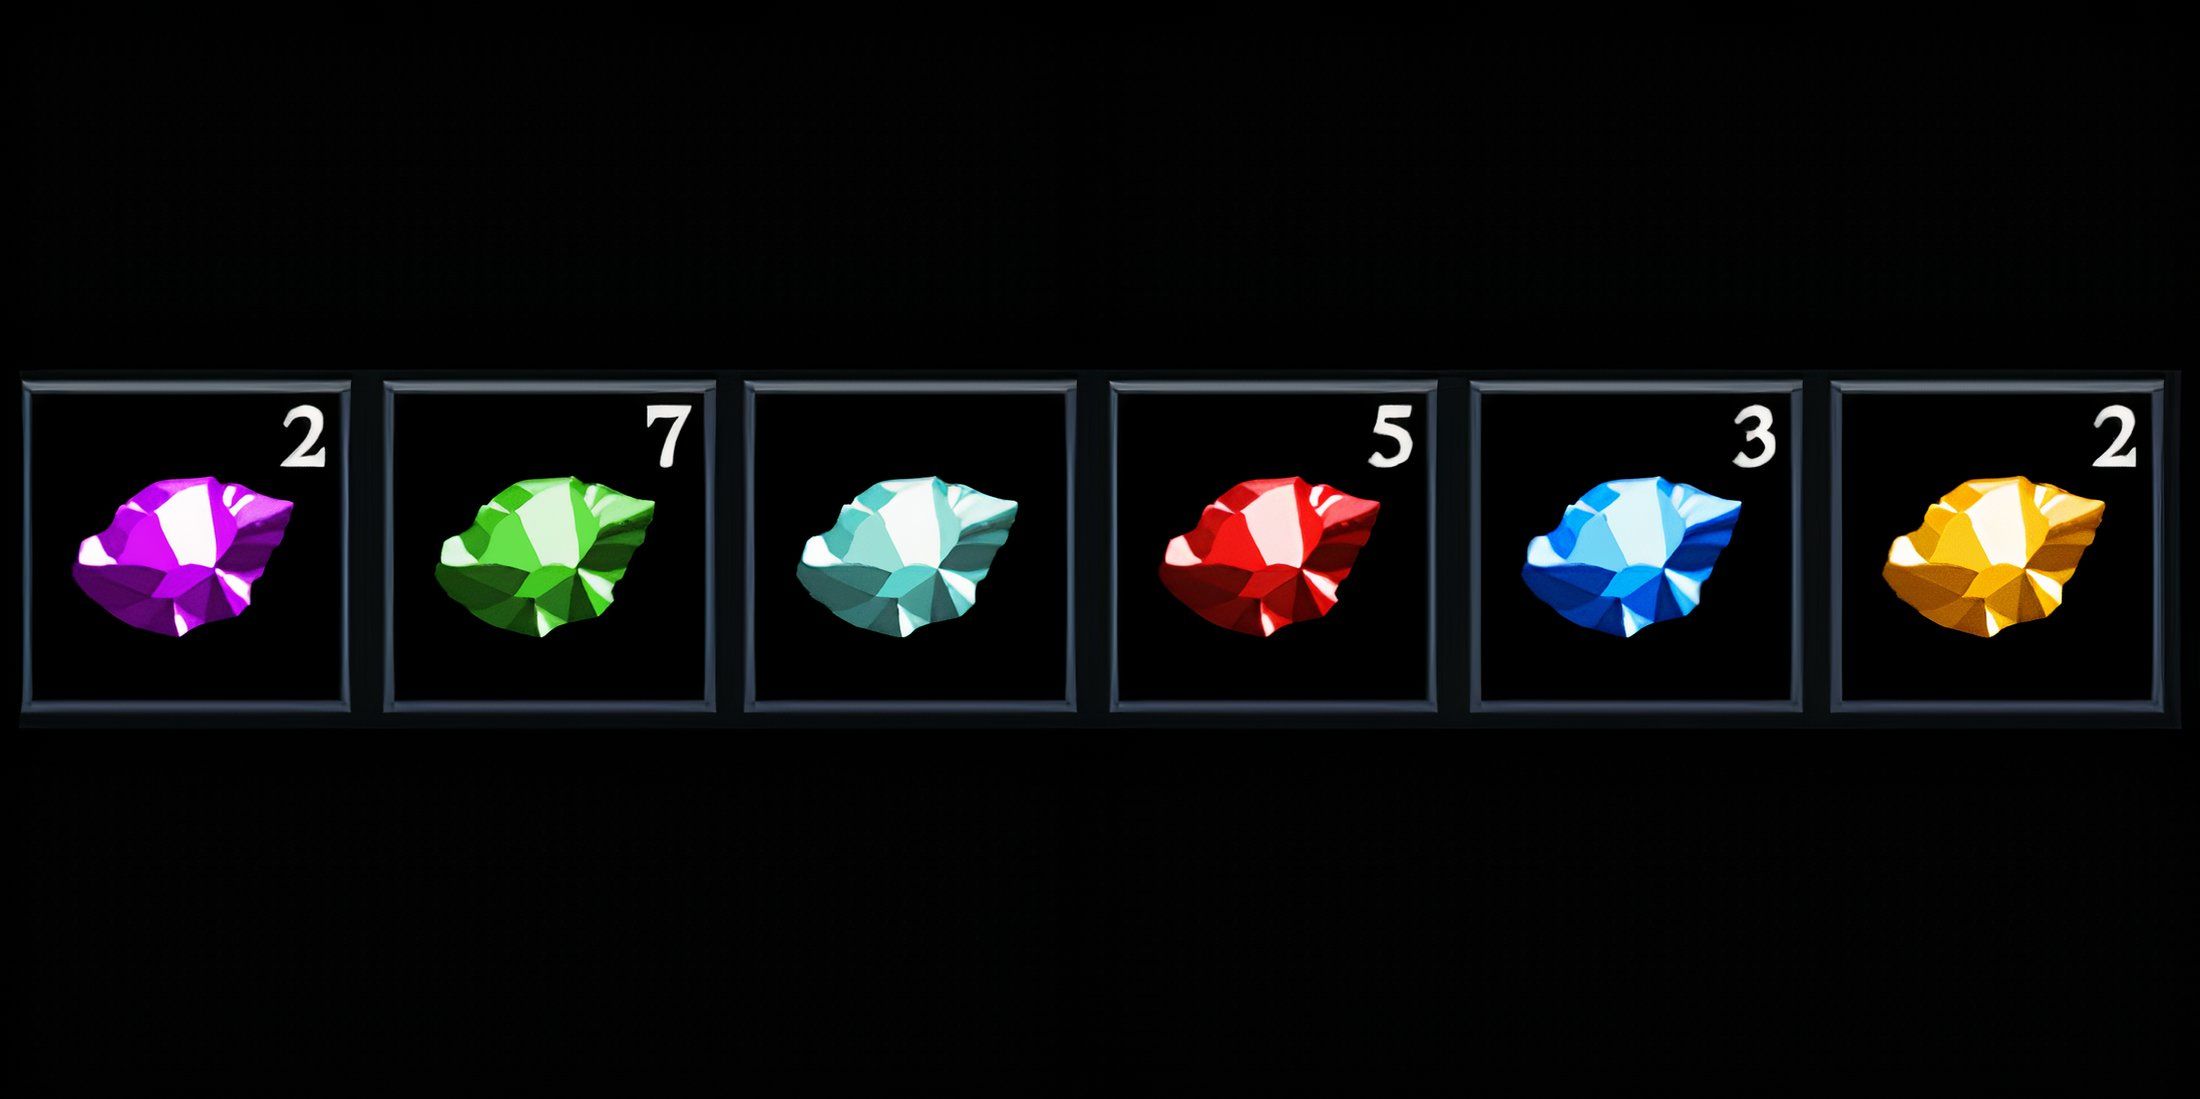 Several Regular Gems in the players inventory